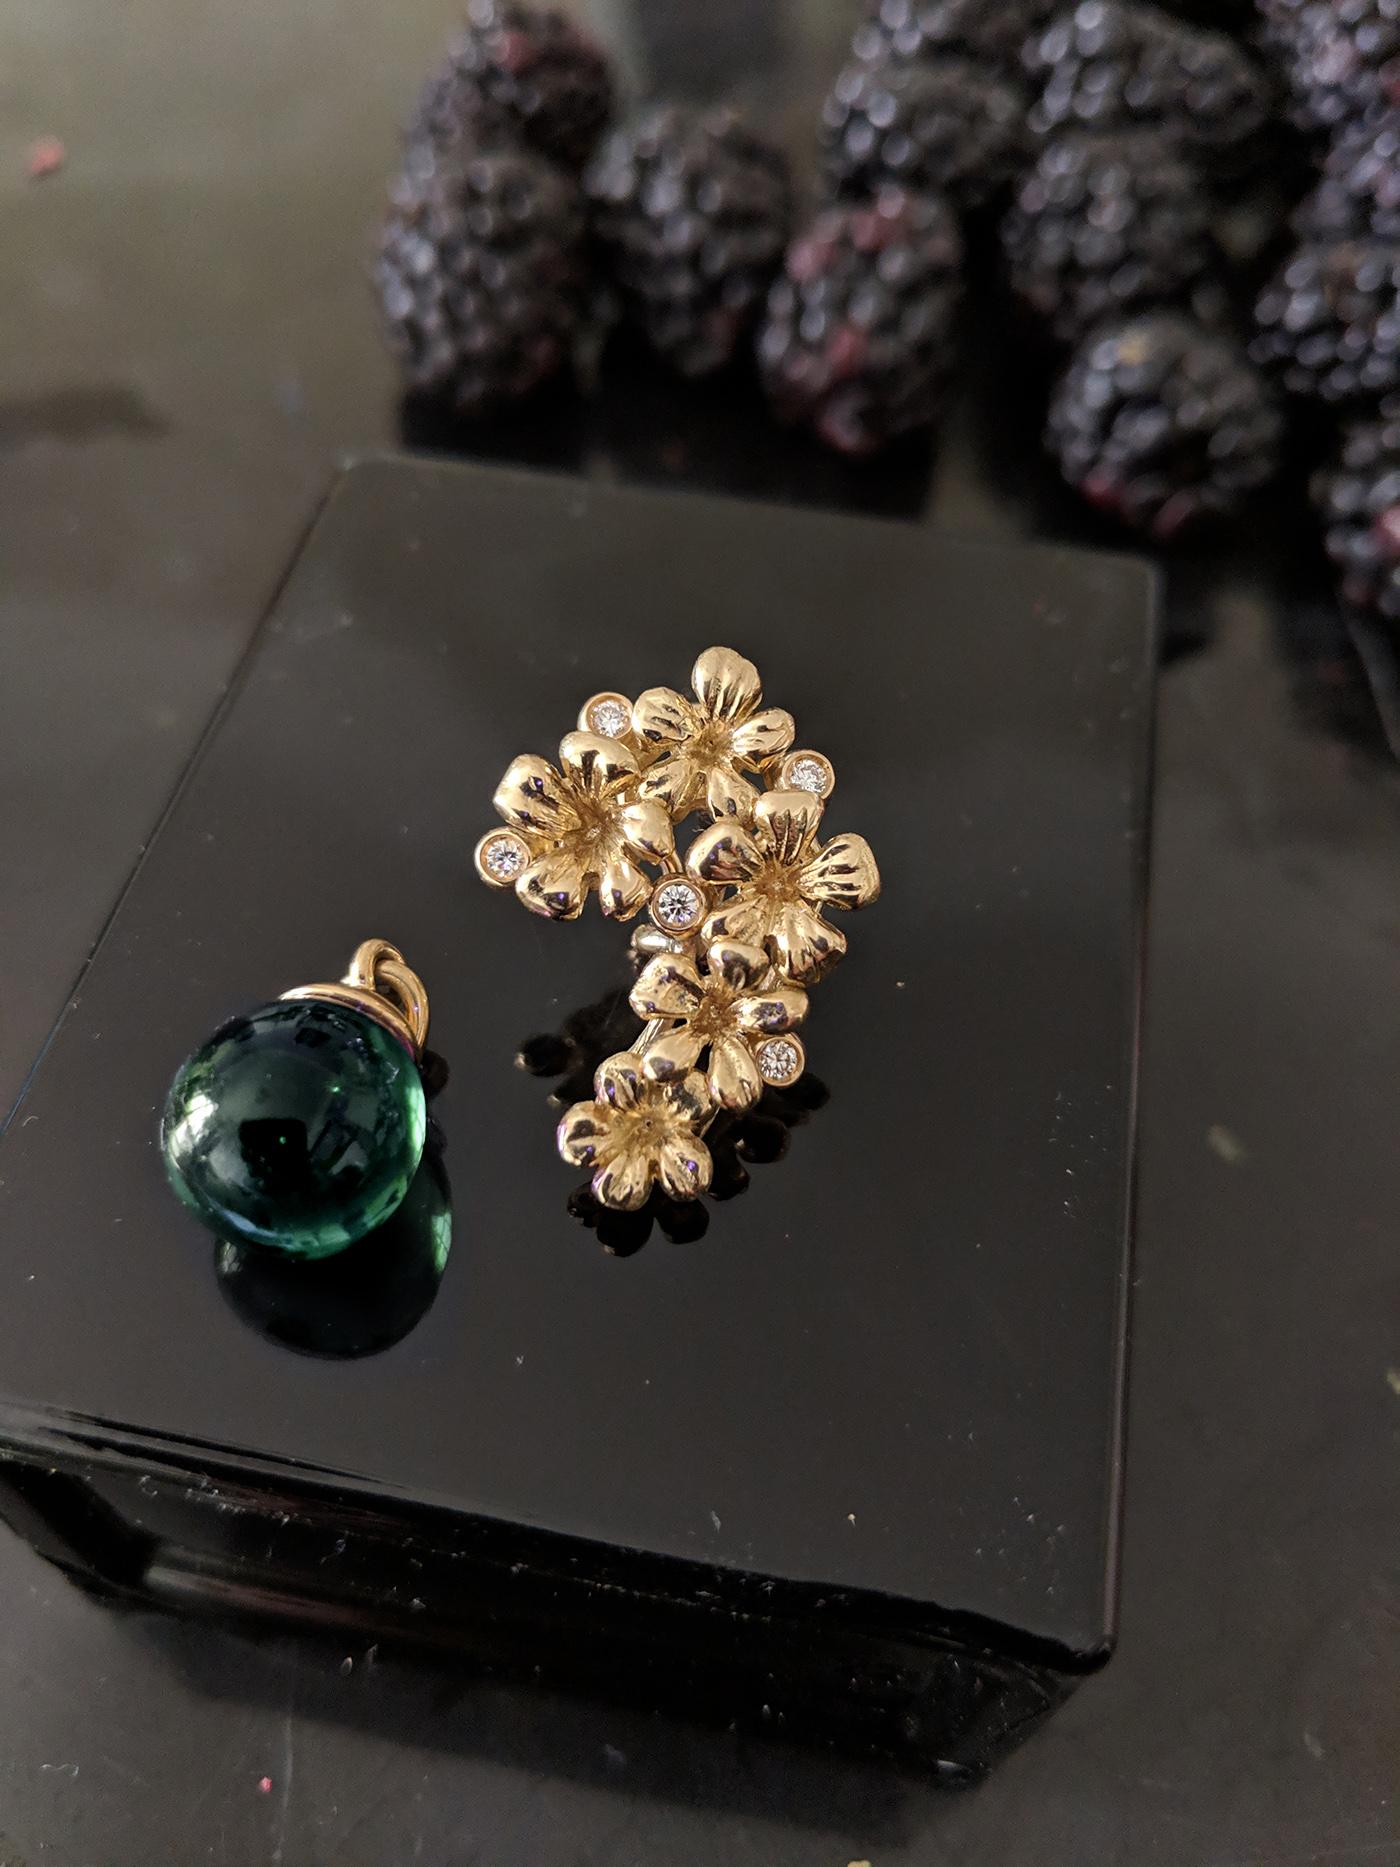 18 karat yellow gold Plum Blossom brooch encrusted with 5 round diamonds and a cabochon green tourmaline drop. This contemporary jewellery collection has been featured in Vogue UA review. We use top natural diamonds VS, F-G, and work with a German